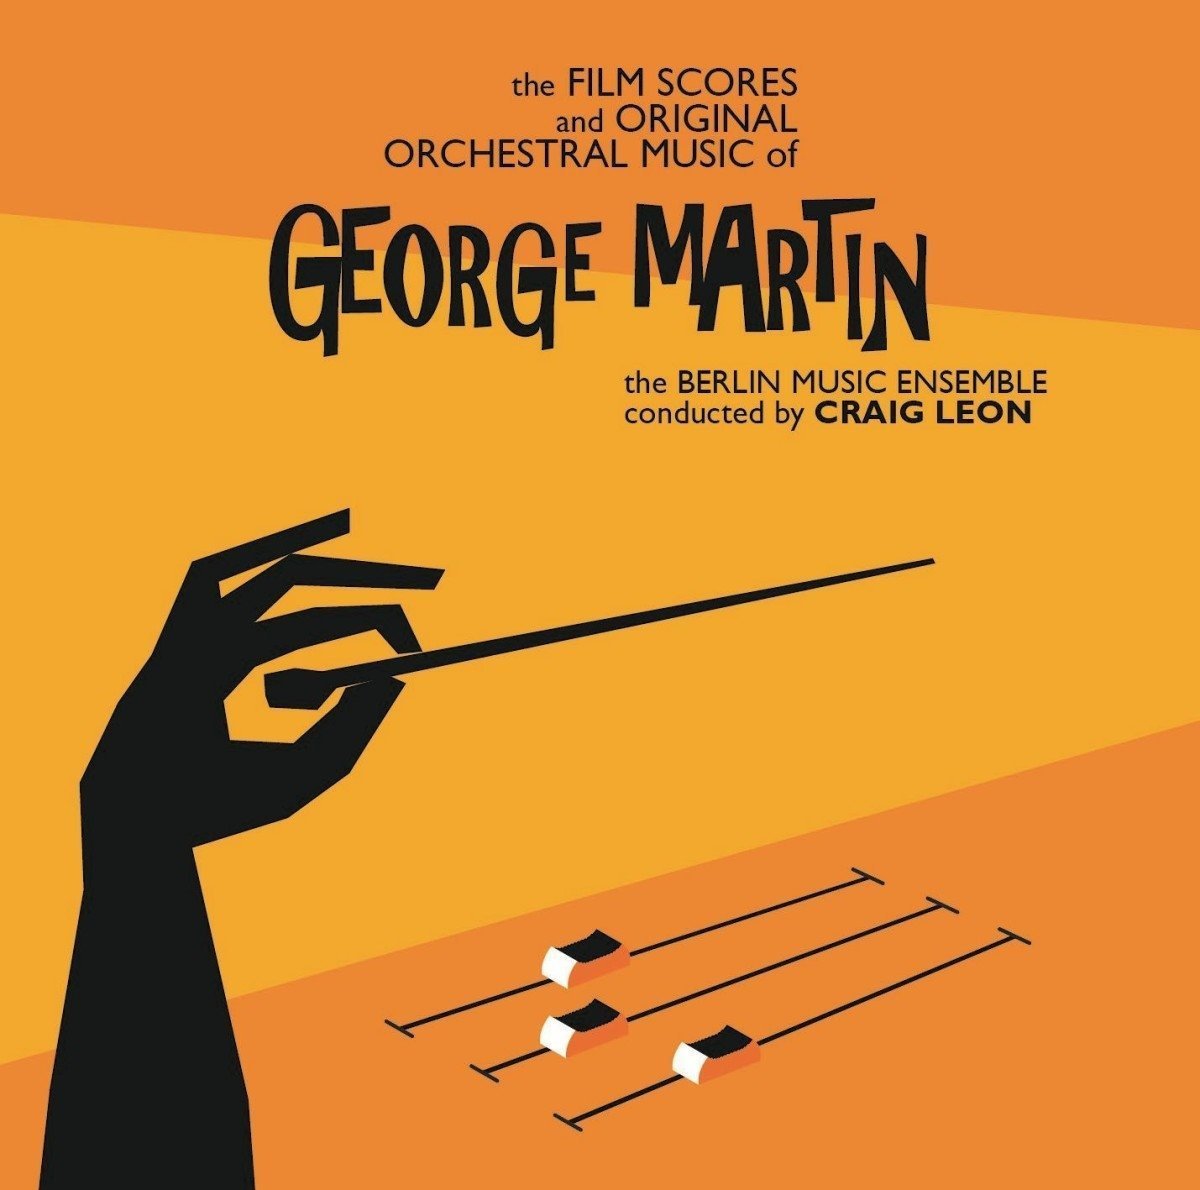 George Martin orchestral music